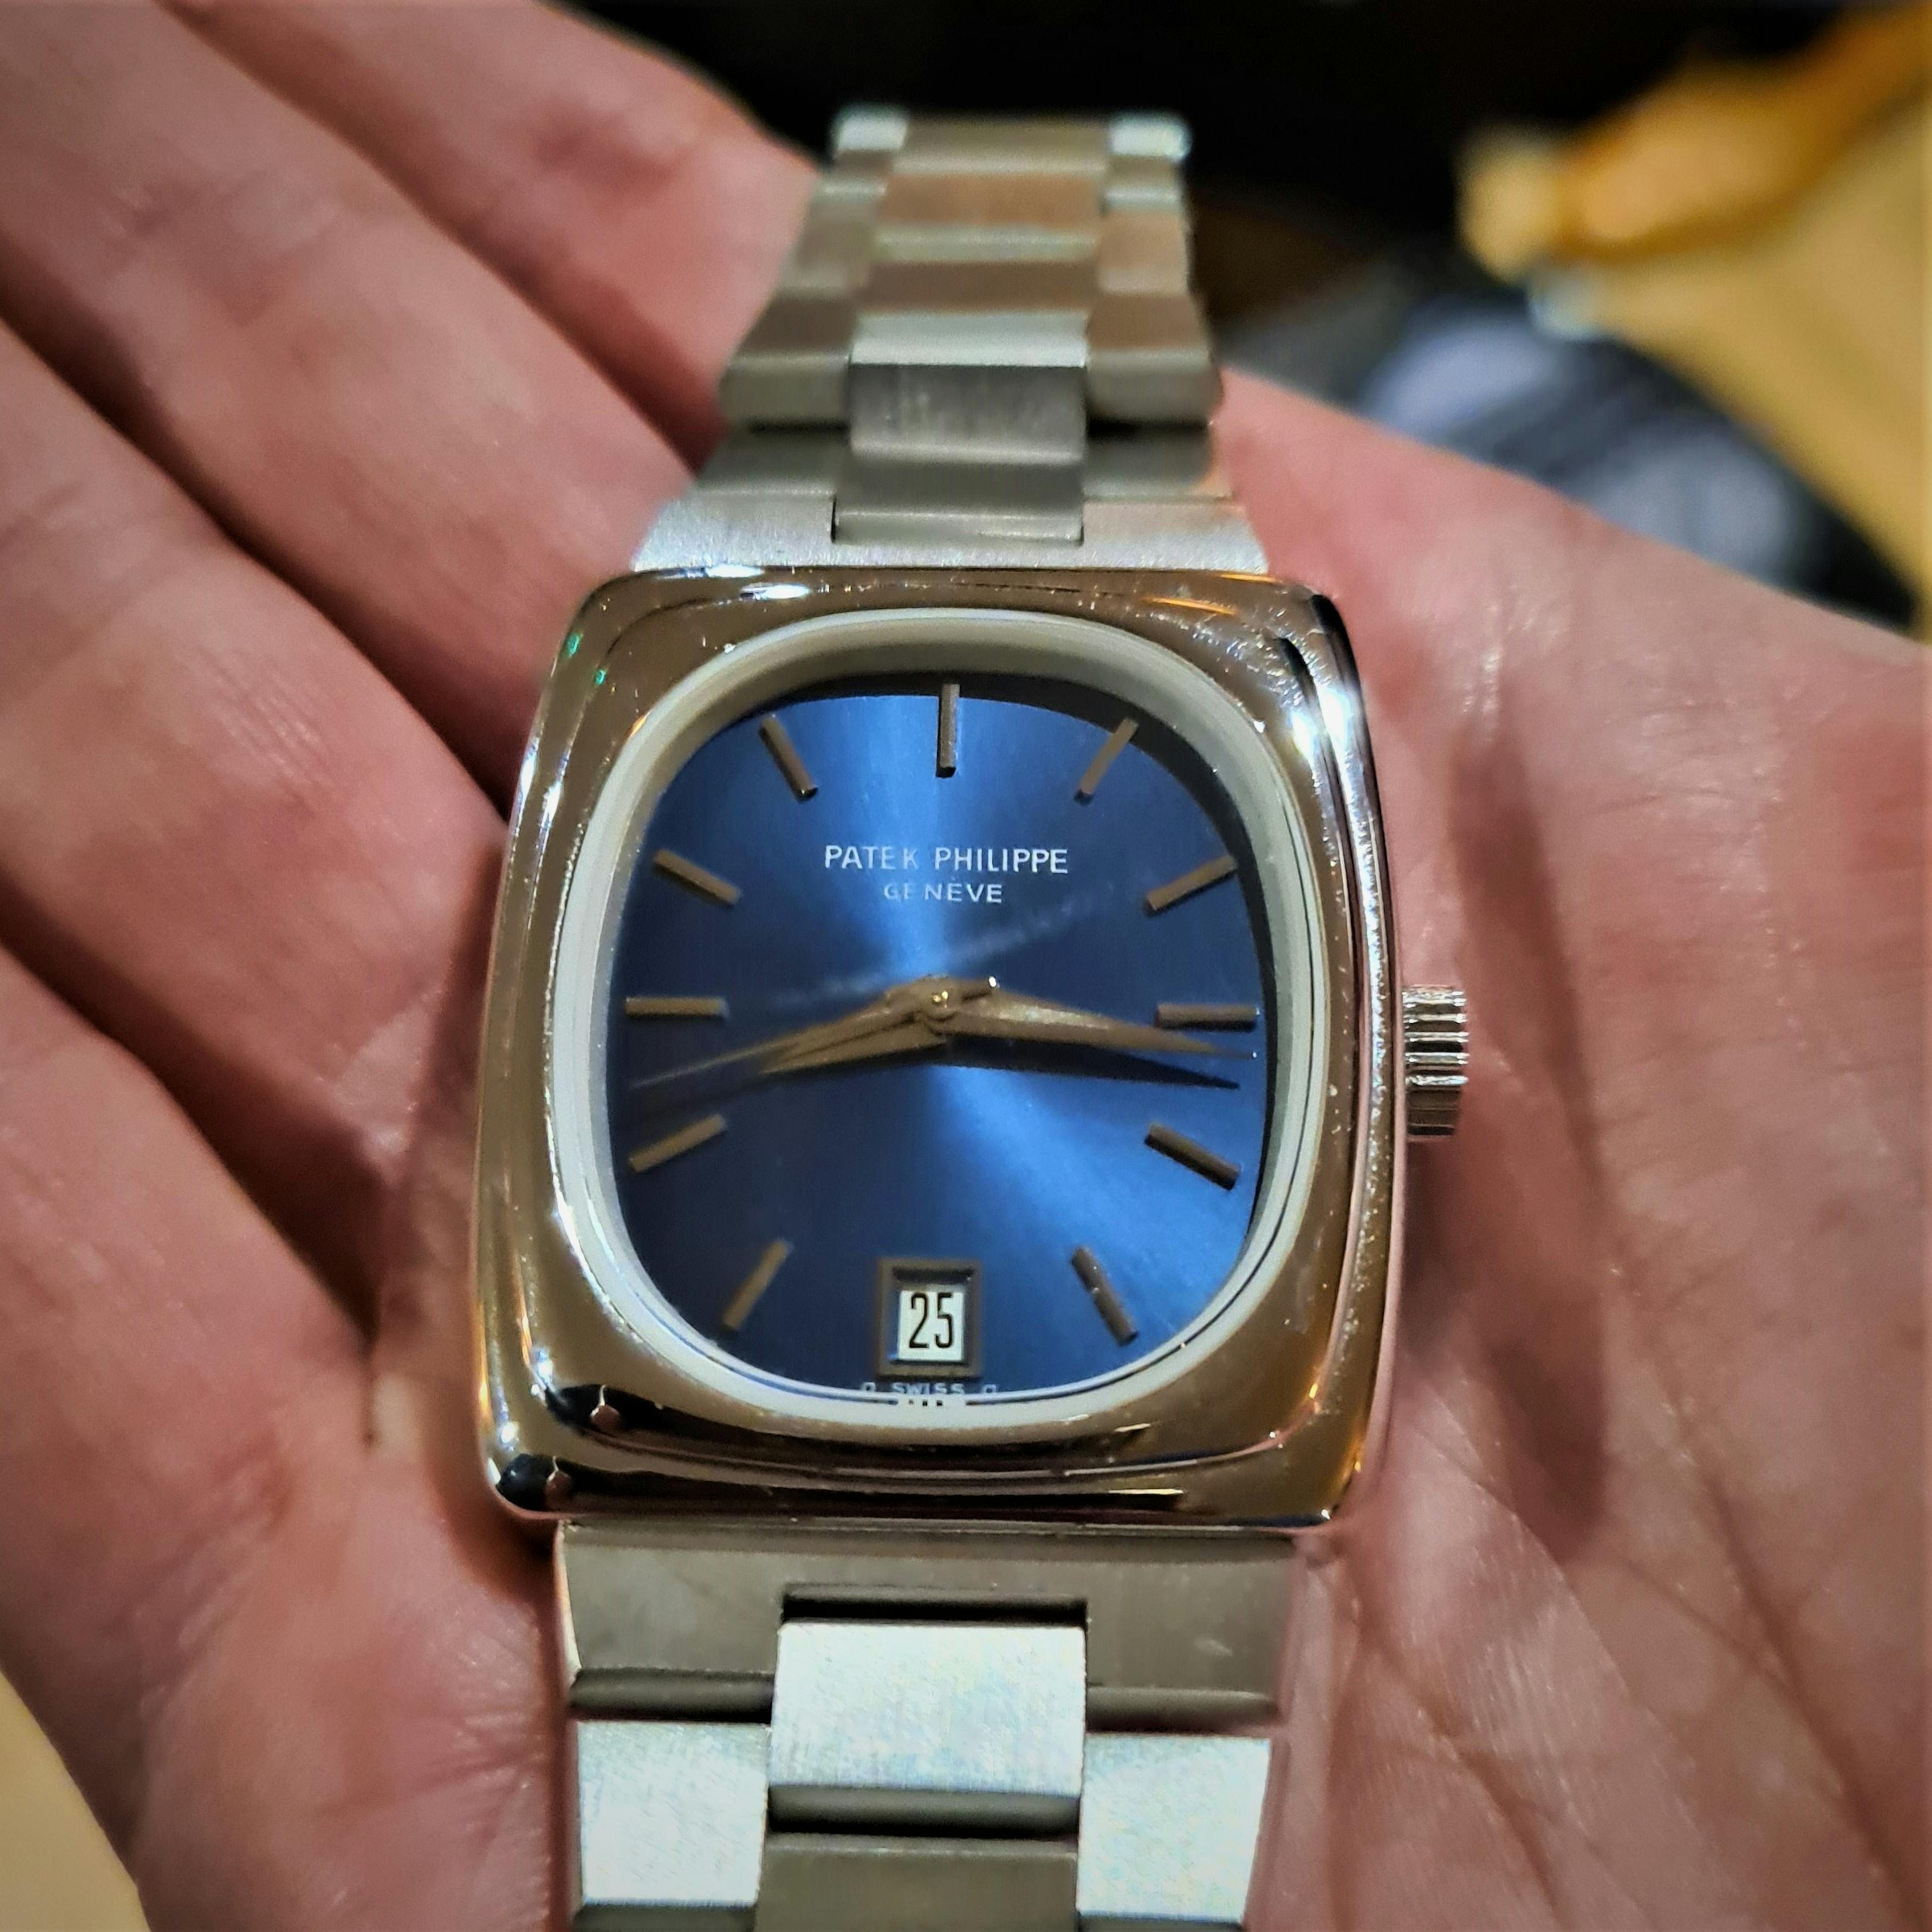 Patek Philippe Beta 21 Ellipse in White Gold. Despite the overall failure of the movement, Patek continued to sell these watches up until 1974.